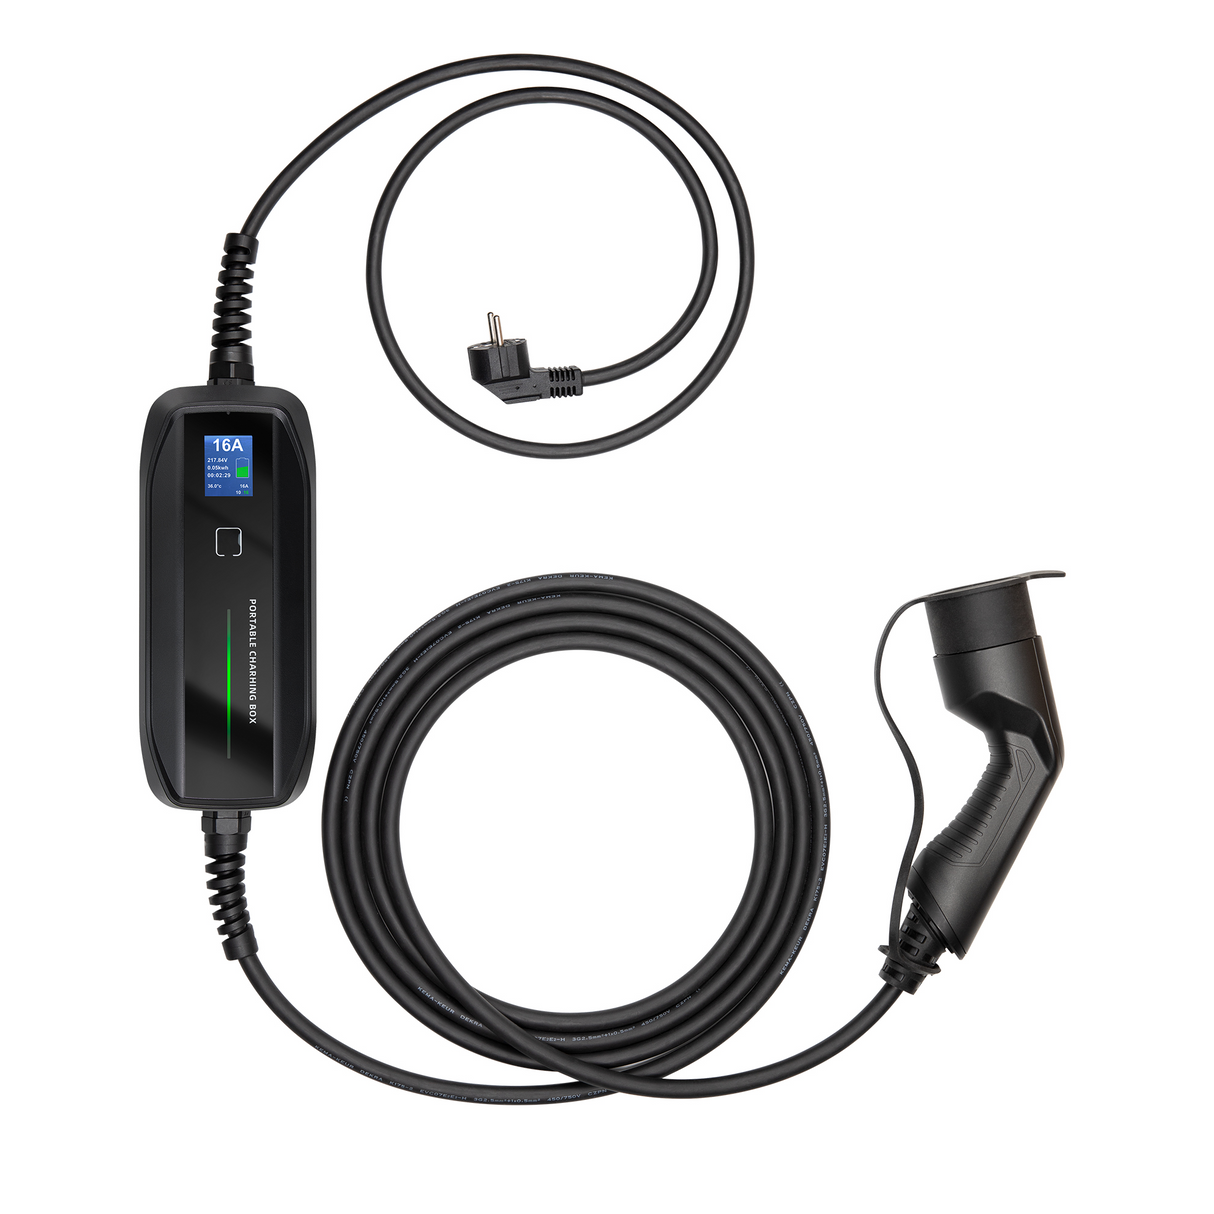 Charger mobile Kia Xceed - LCD Black Type 2 à Schuko